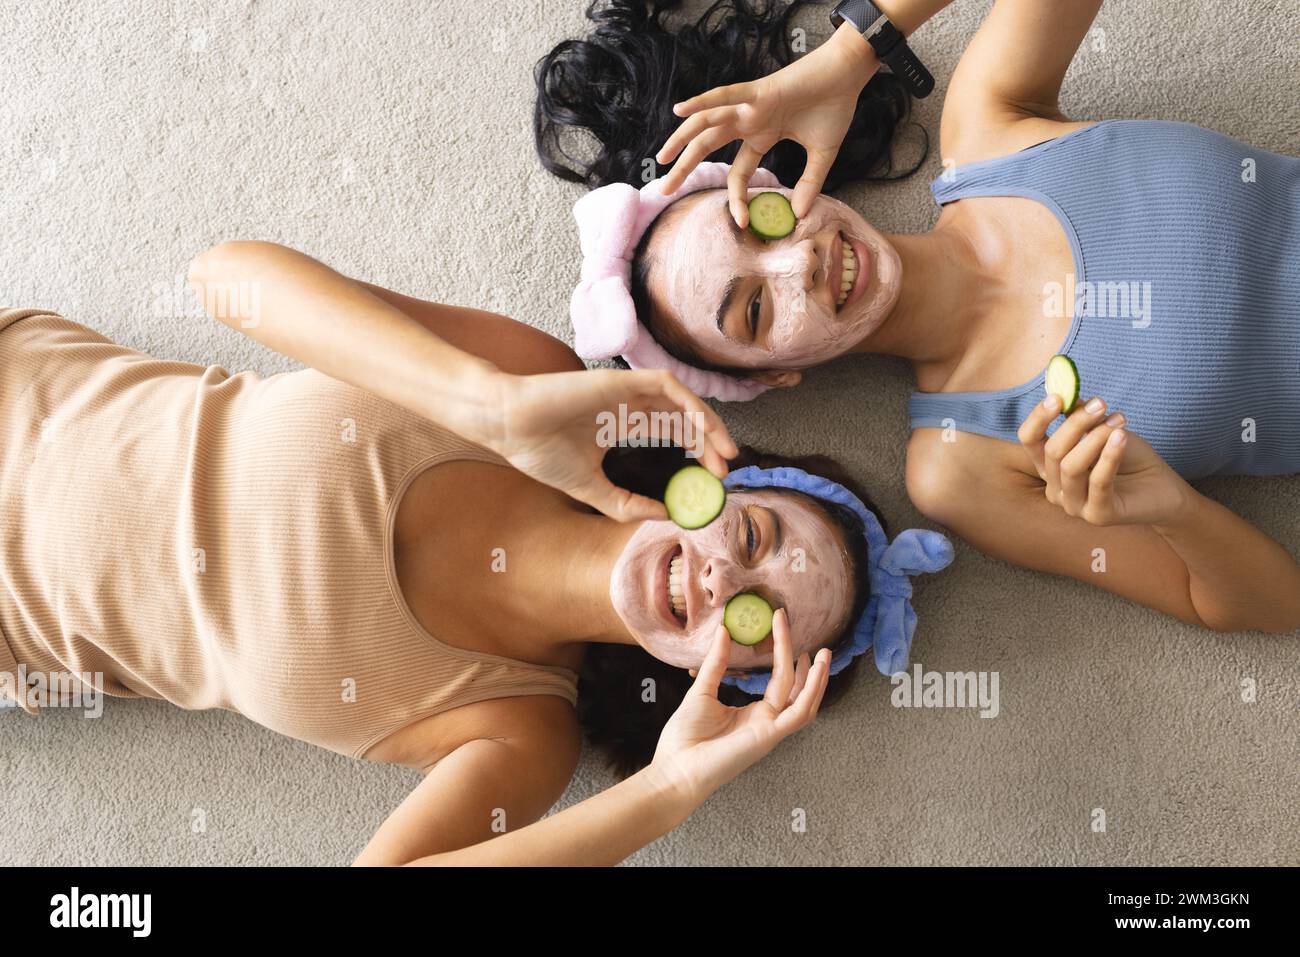 Two young biracial women enjoy a spa day at home Stock Photo